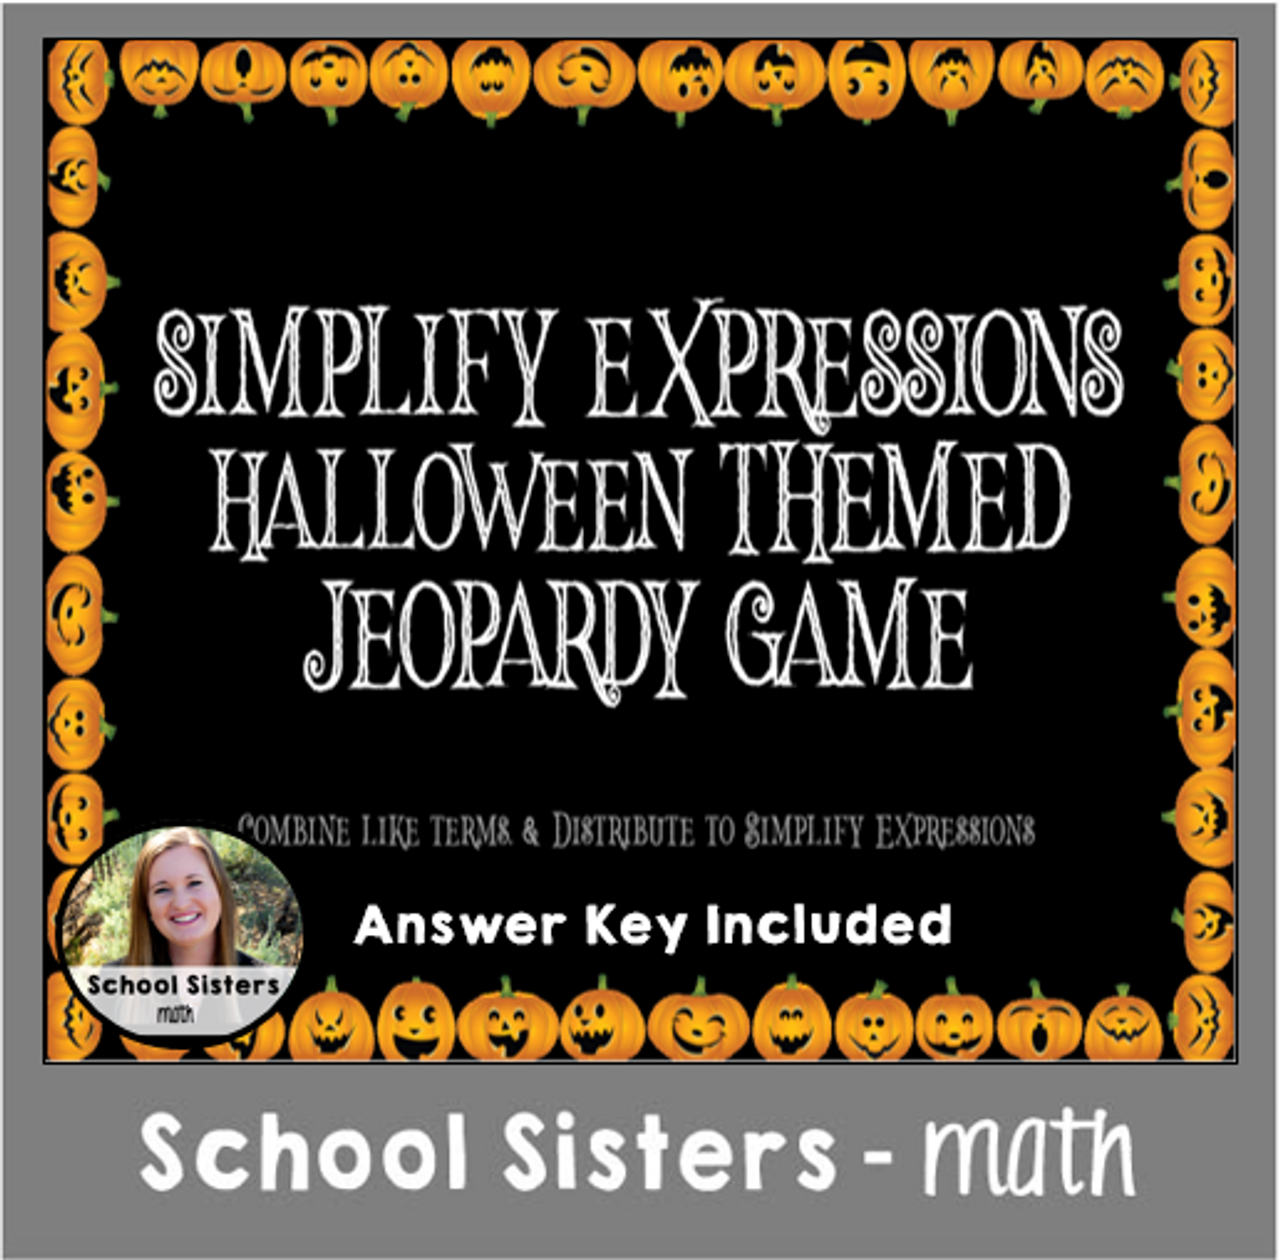 Simplify Expressions Halloween Themed Jeopardy